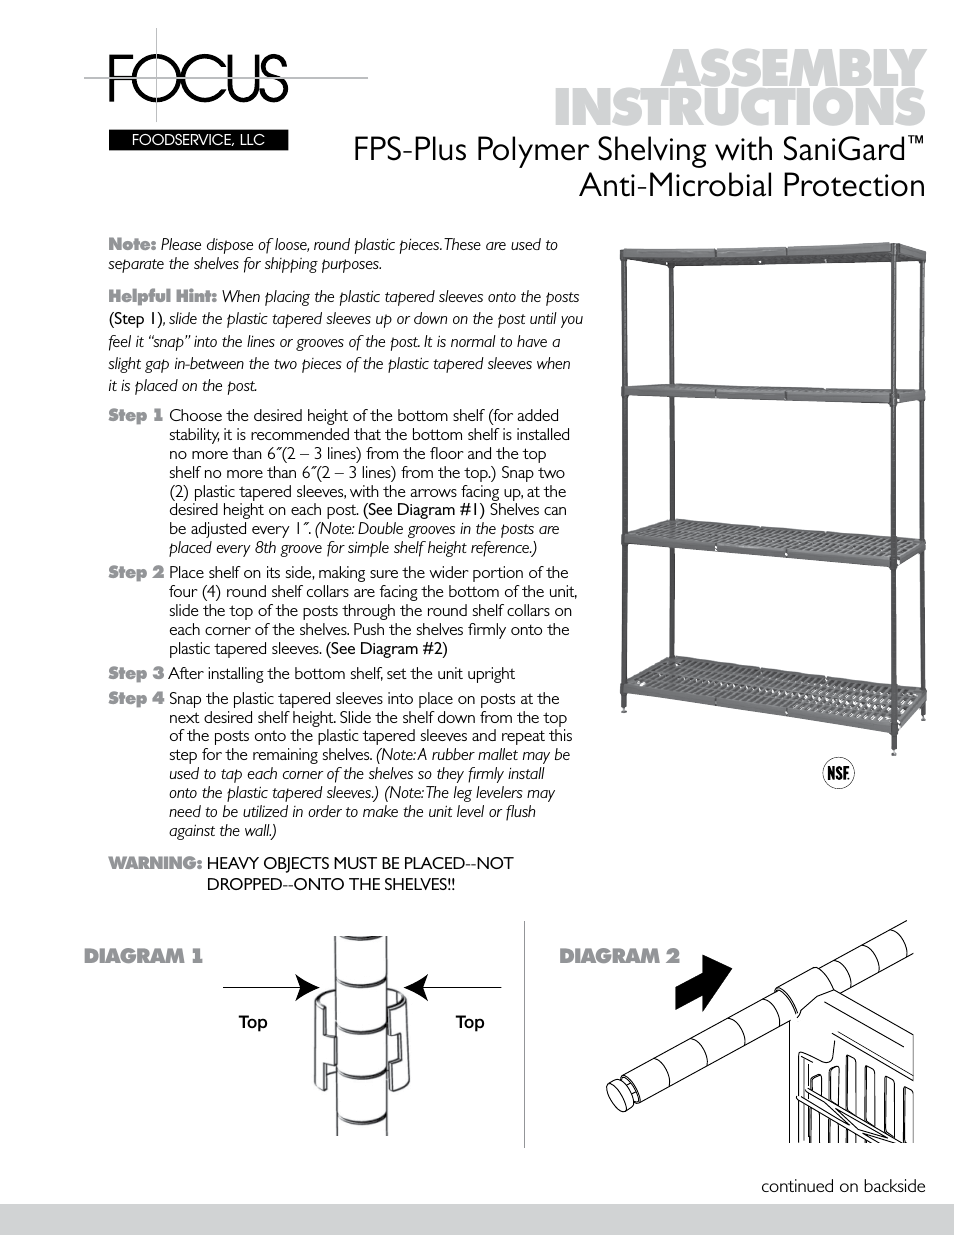 FPS-Plus Polymer Shelving with SaniGard Anti-Microbial Protection - Assembly Instructions